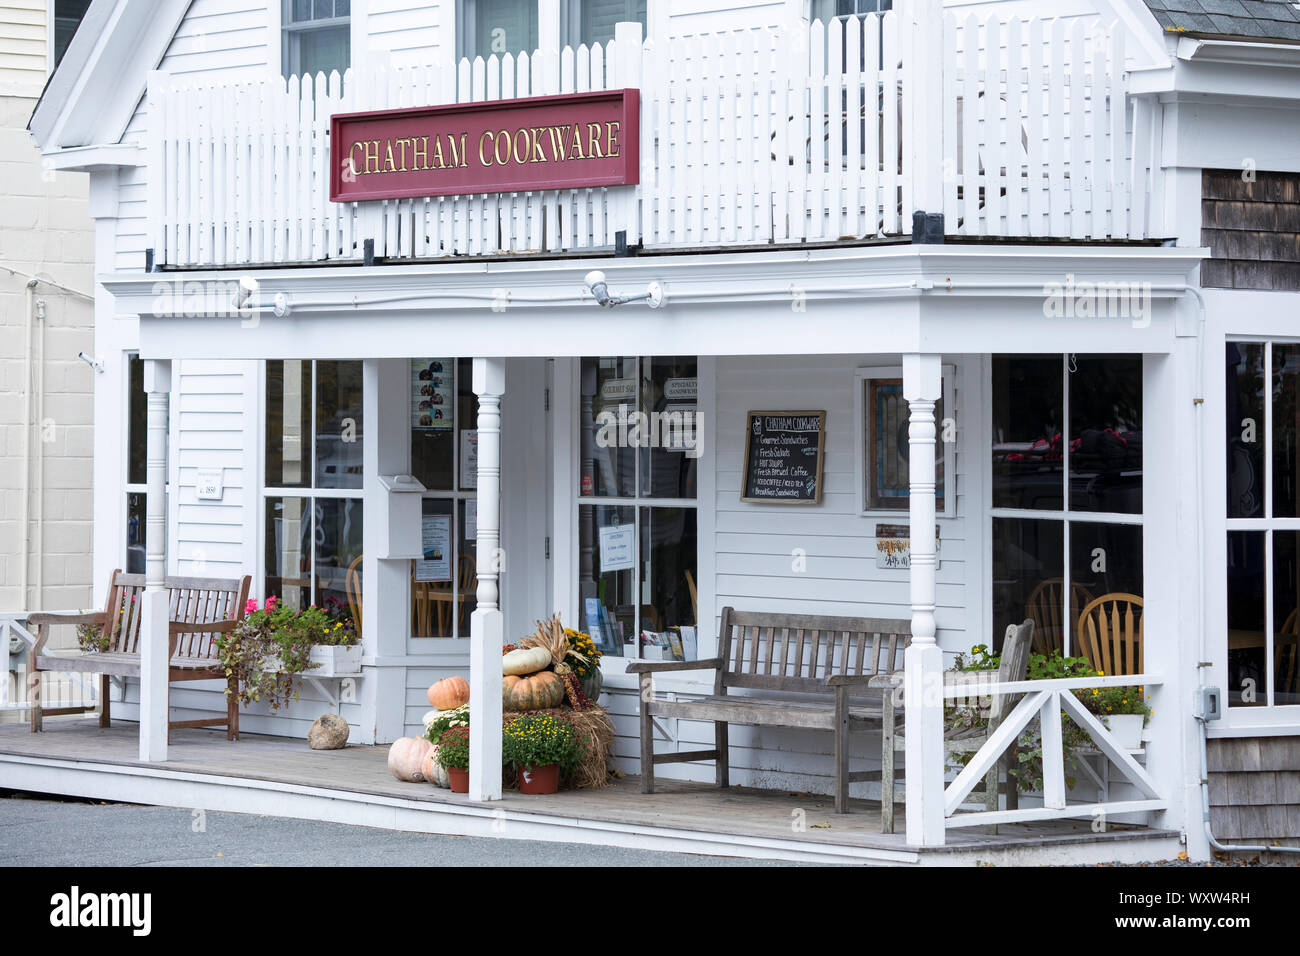 Chatham Cookware store, a shop with traditional decking  in the High Street at Chatham, Cape Cod New England, USA Stock Photo